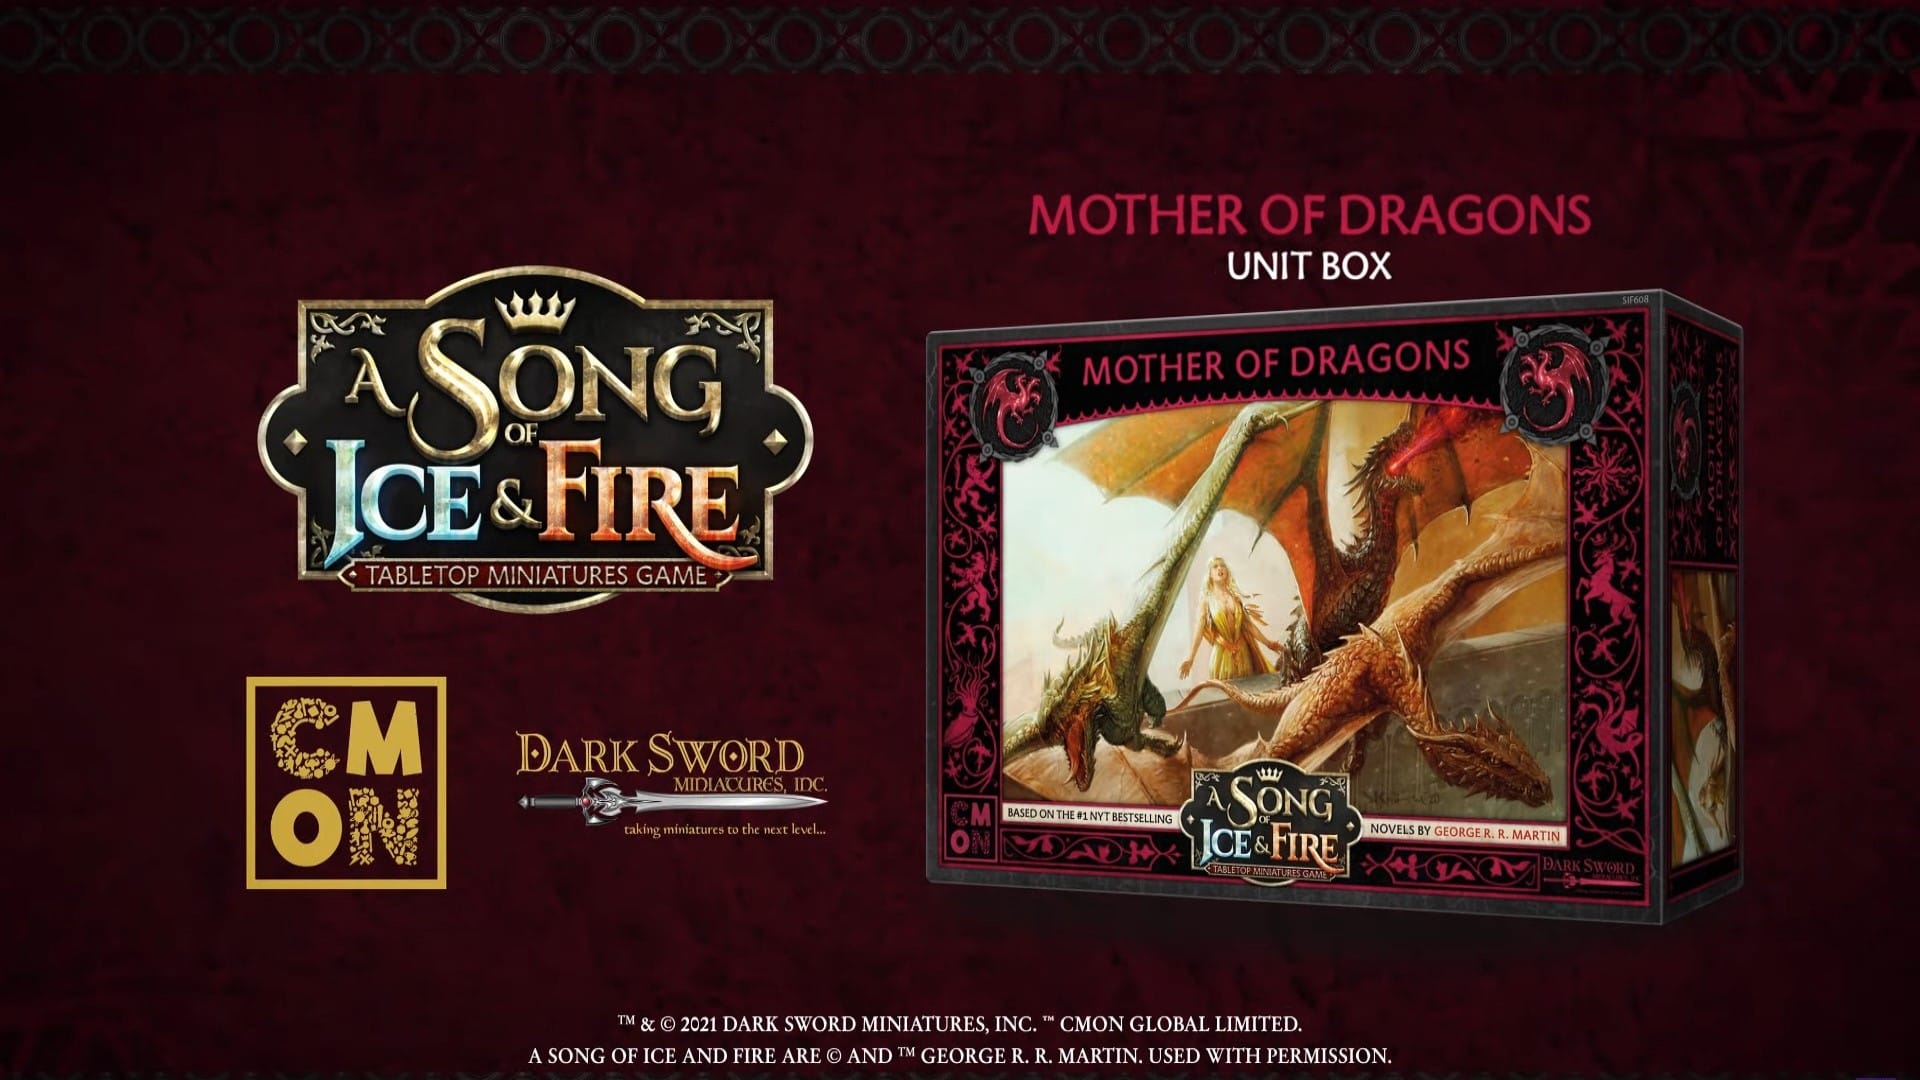 Official press image of the Mother of Dragons box set